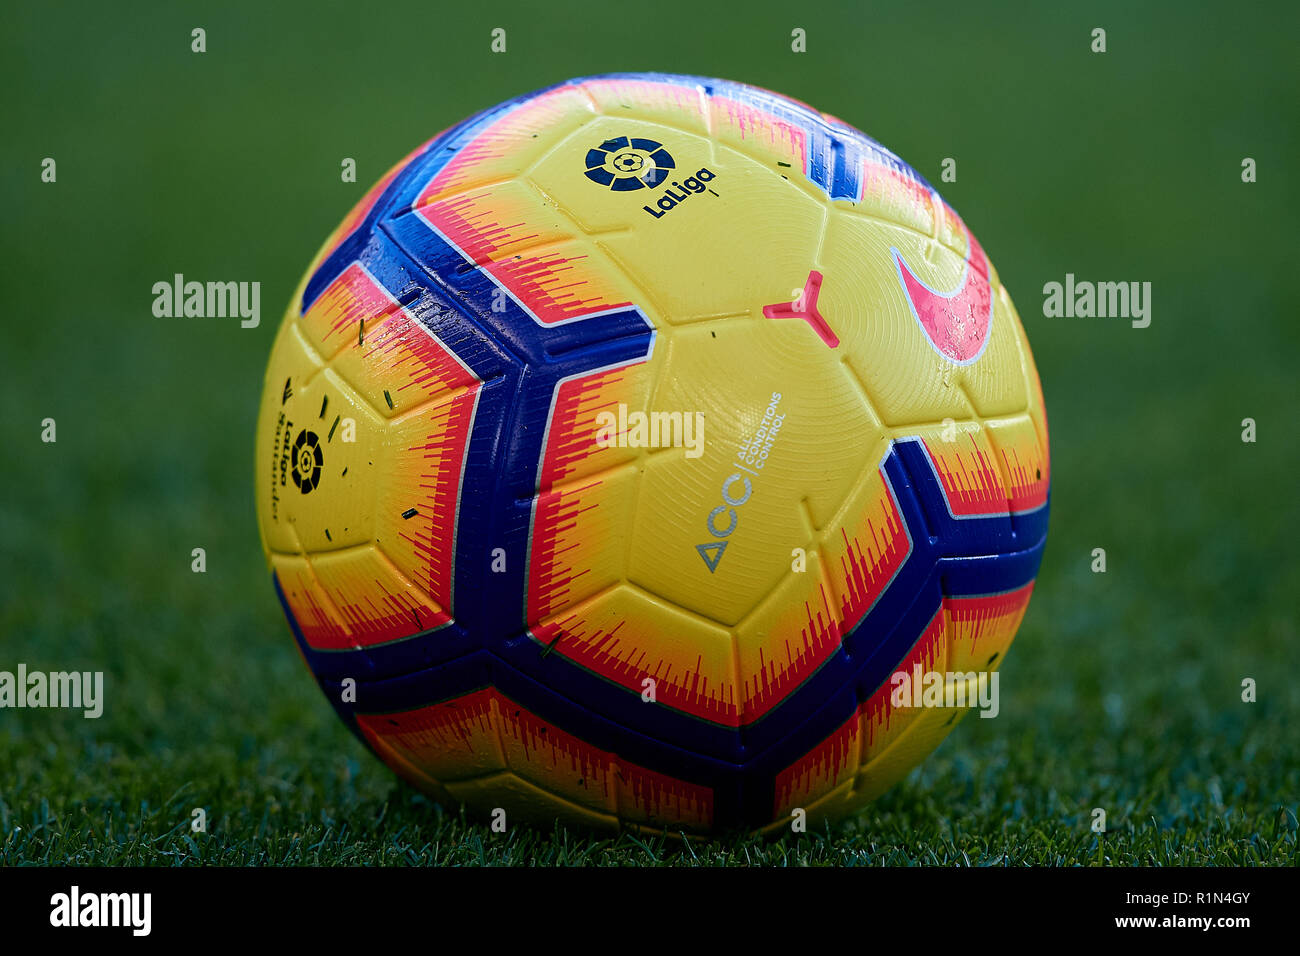 BARCELONA, SPAIN - OCTOBER 28: Official match ball prior to the La Liga  match between FC Barcelona